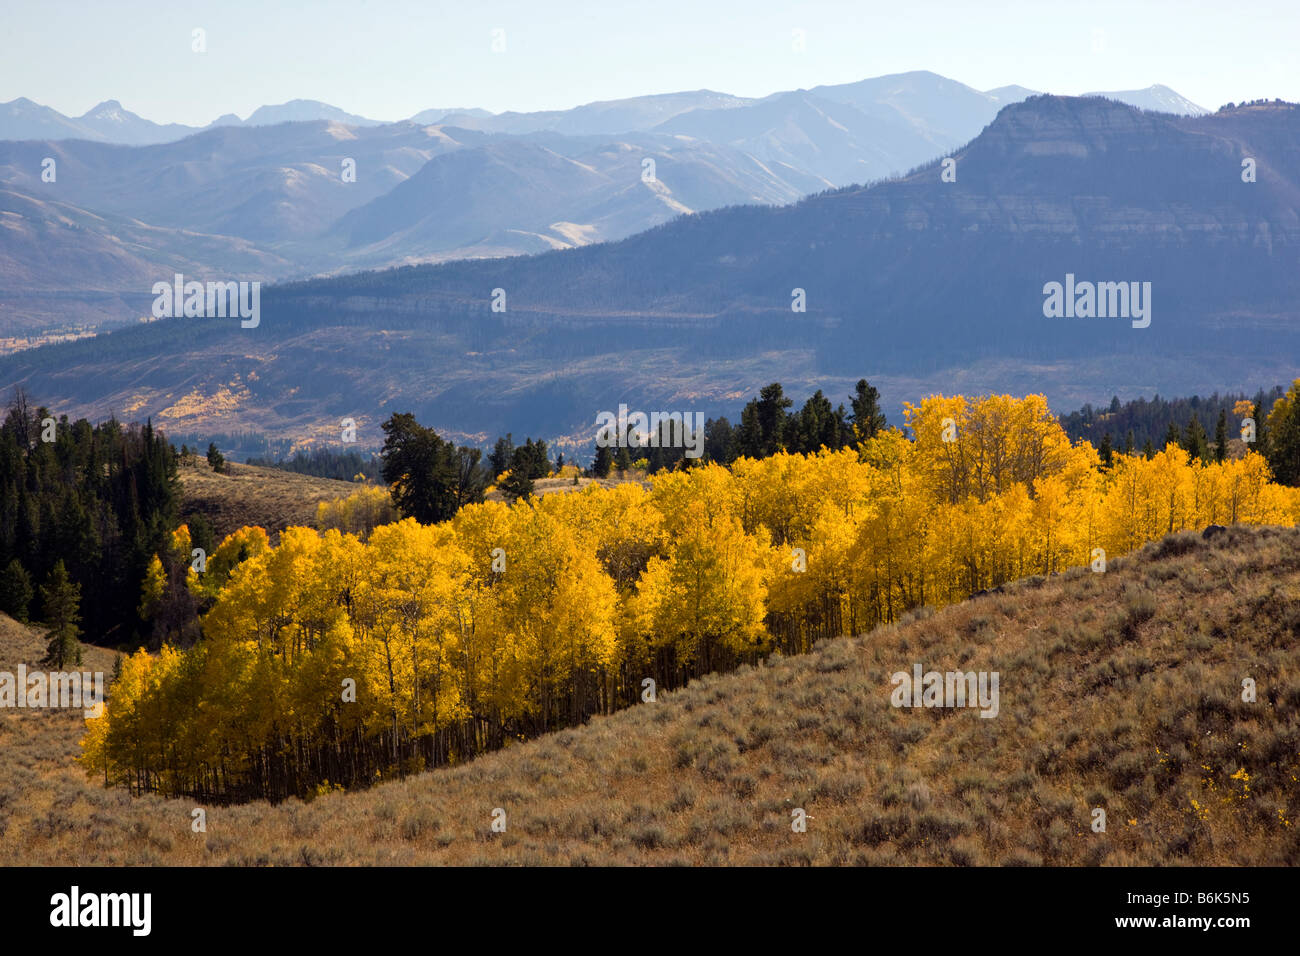 Aspen trees in fall color on the Beartooth Scenic Byway Rt 212 crosses Beartooth Pass 10,947. Stock Photo